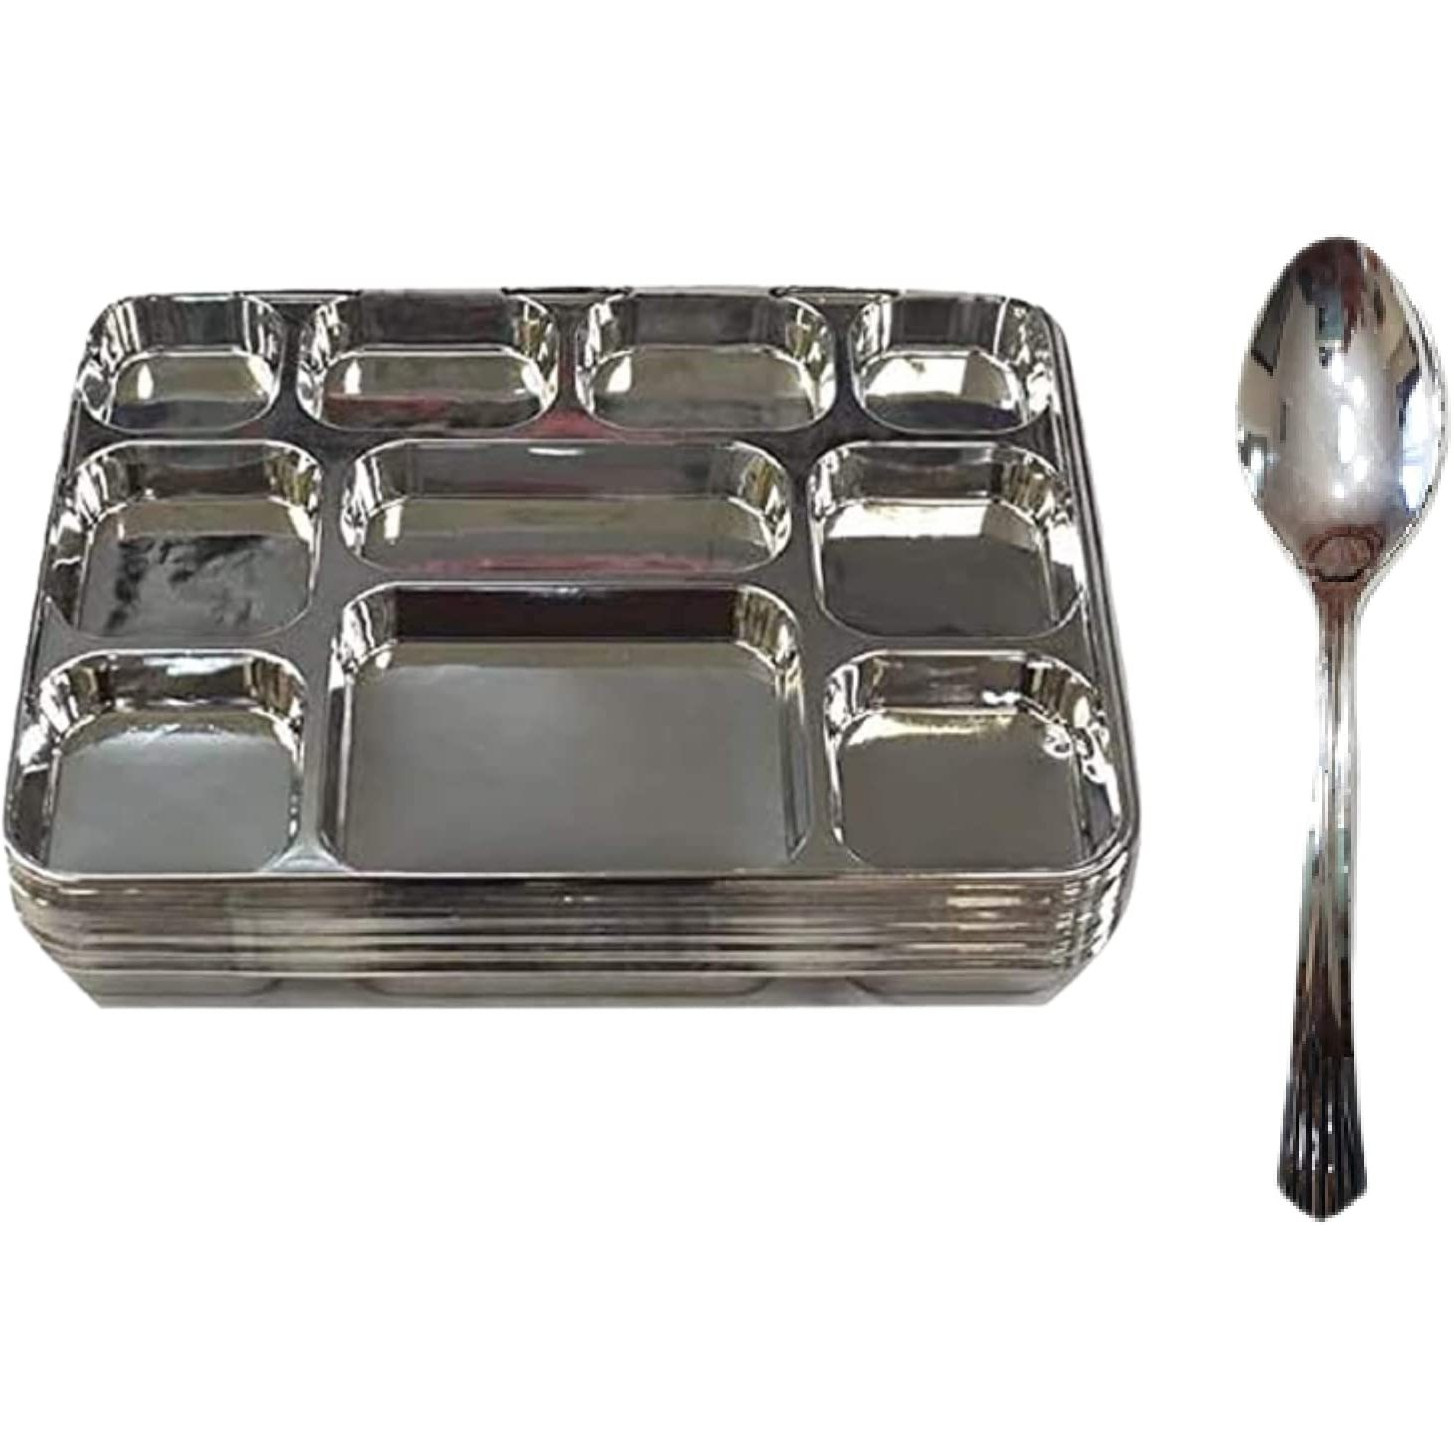 Disposable Plates 10 Compartment Silver Thali Plates Trays - For Indian Puja, Partys, Weddings